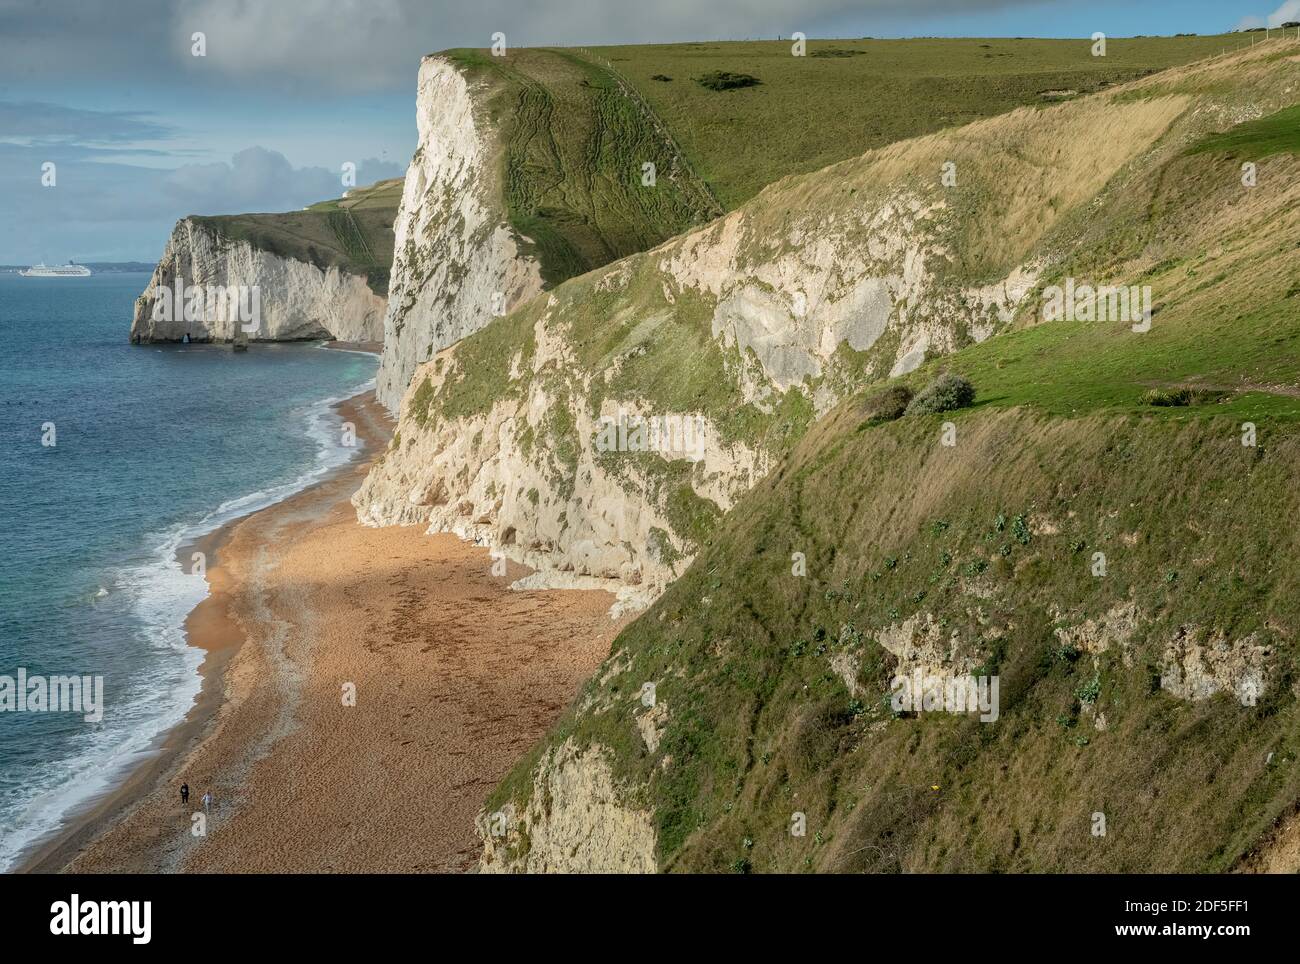 Chalk cliffs and downs west of Lulworth, looking towards Swyre Head. Jurassic coast, Dorset. Stock Photo